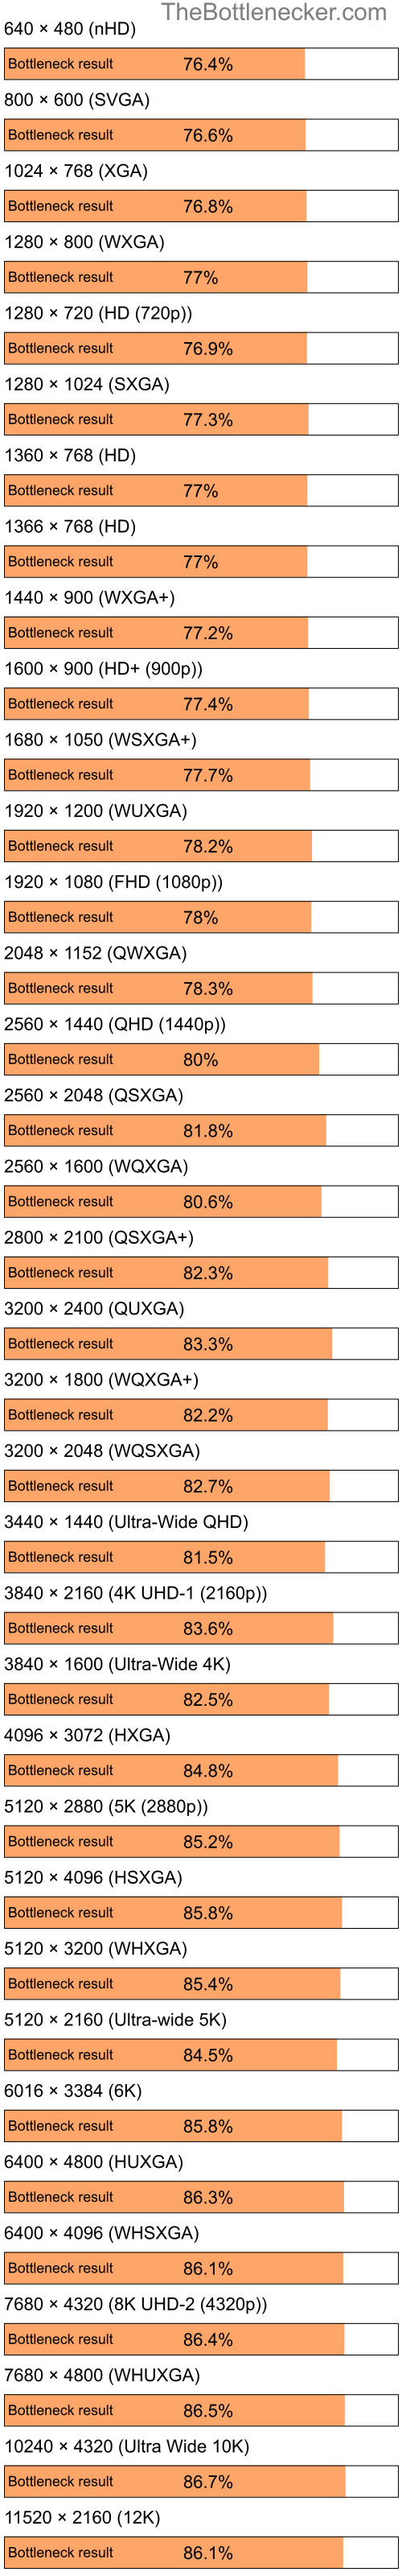 Bottleneck results by resolution for Intel Pentium 4 and AMD Mobility Radeon XPRESS 200 in General Tasks